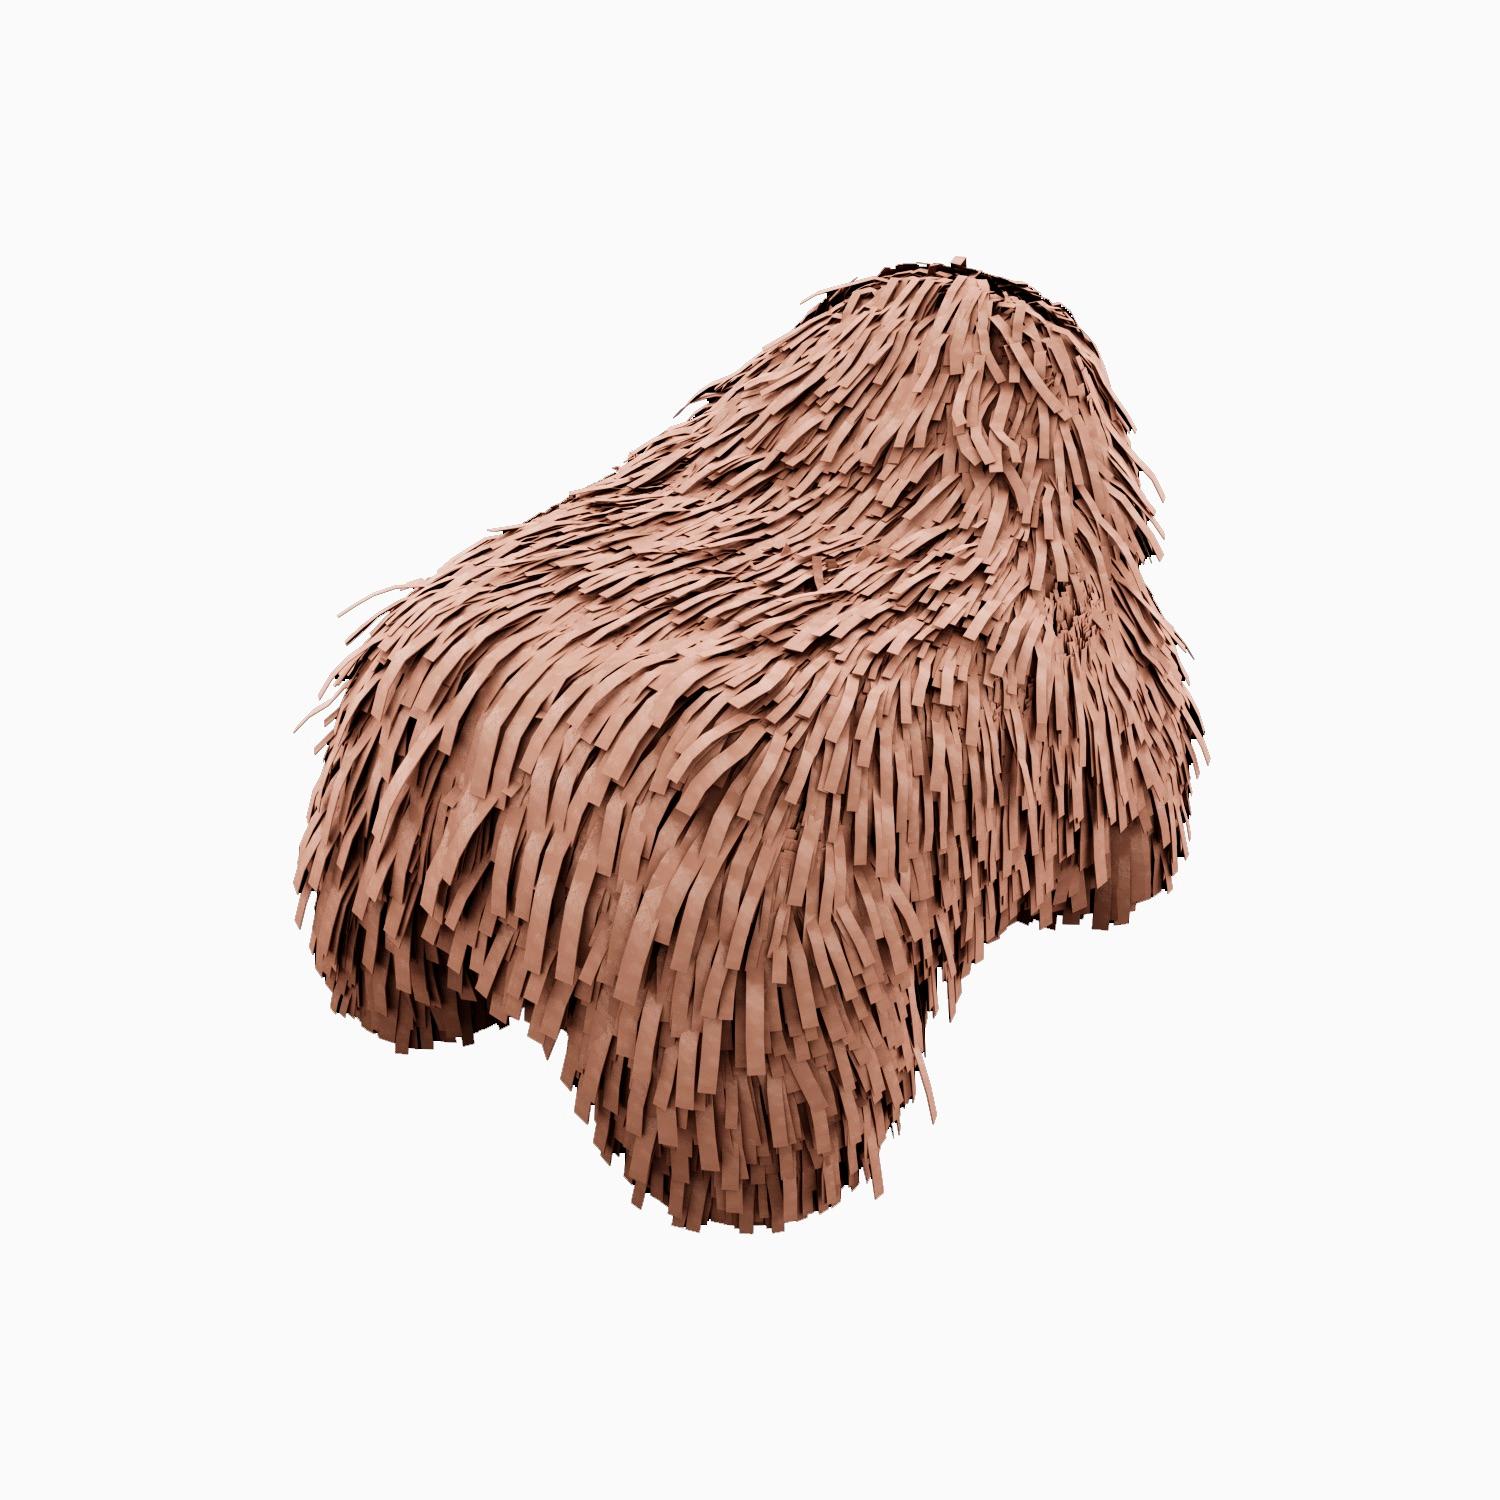 Puppy Pouffe Pink is a hip little seat with luxurious shaggy suede. This cute piece of furniture is a delight around the house like a new pup

For his debut creations, Marcantonio introduced “Vegetal Animal”, a concept that evokes strong emotions